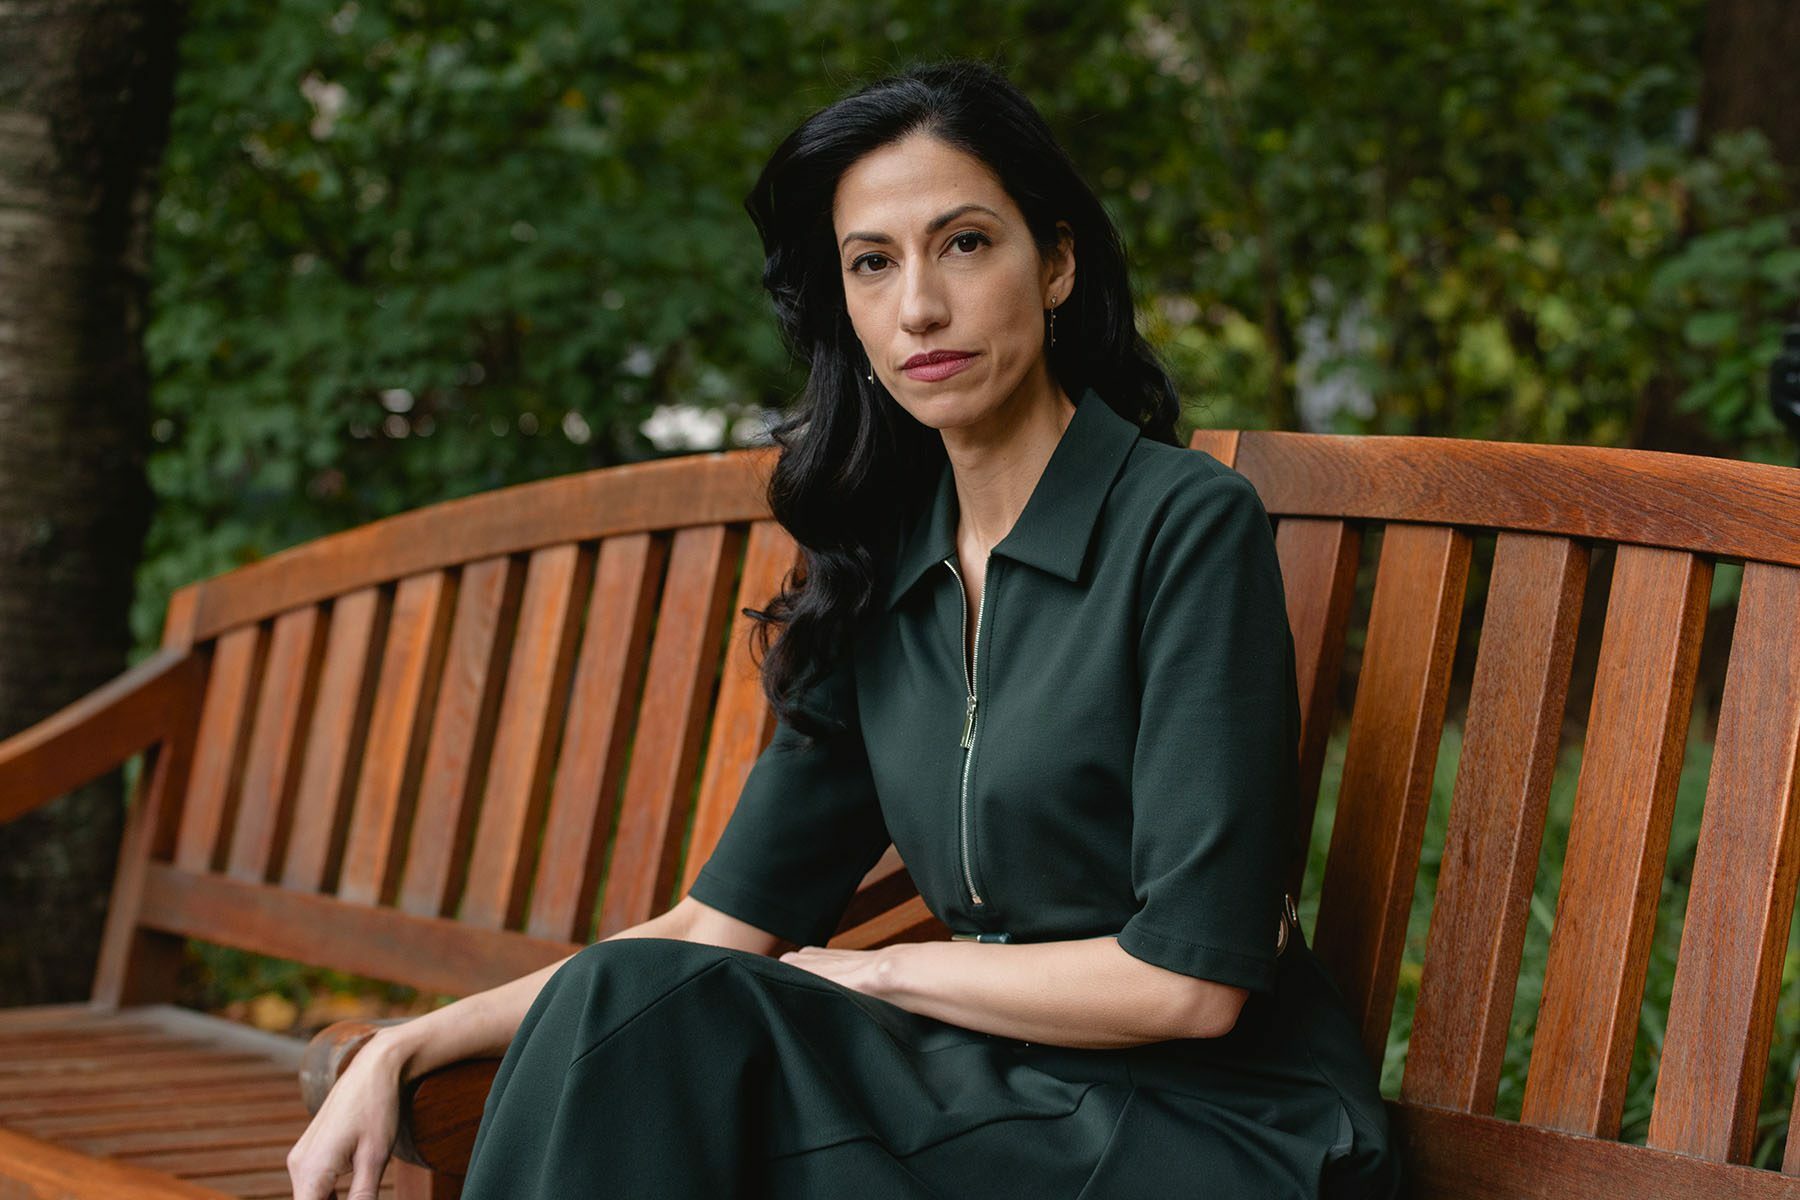 Huma Abedin poses for a portrait at a park in New York.